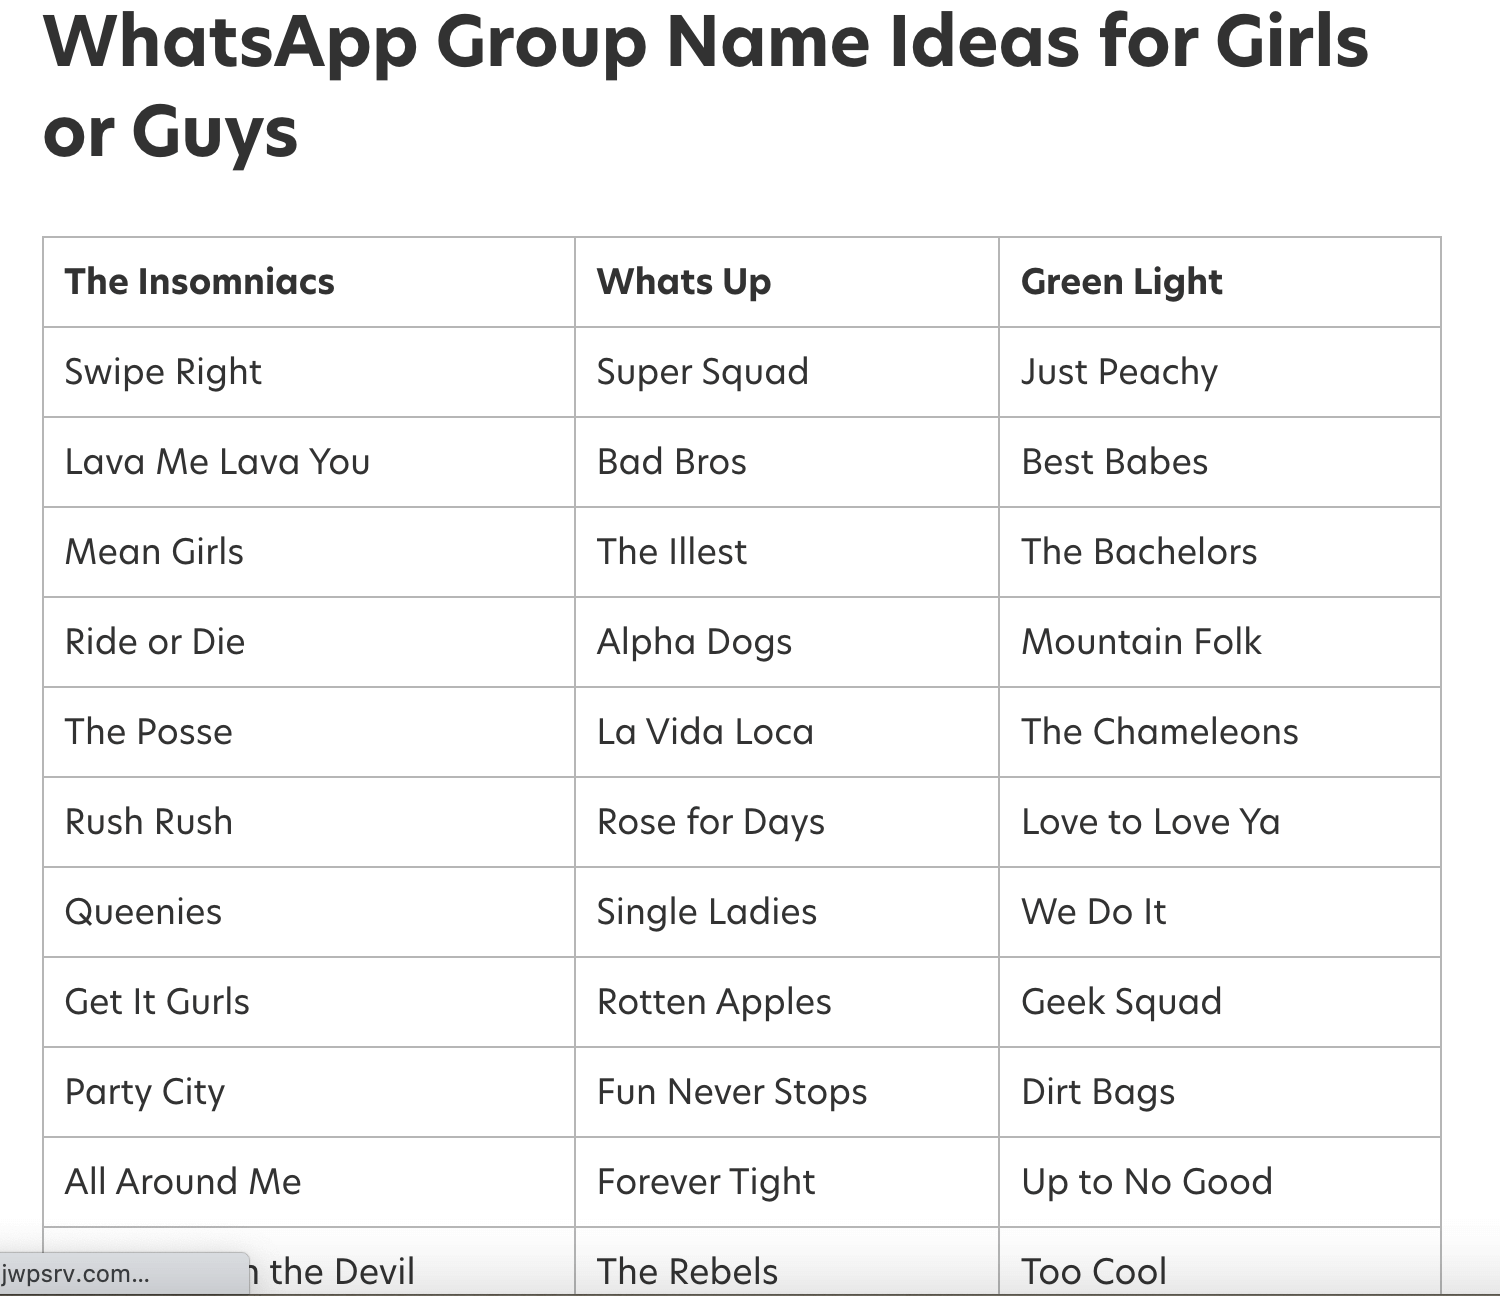 10,000+ Most Funny WhatsApp Group Names (2021) | WHITEDUST